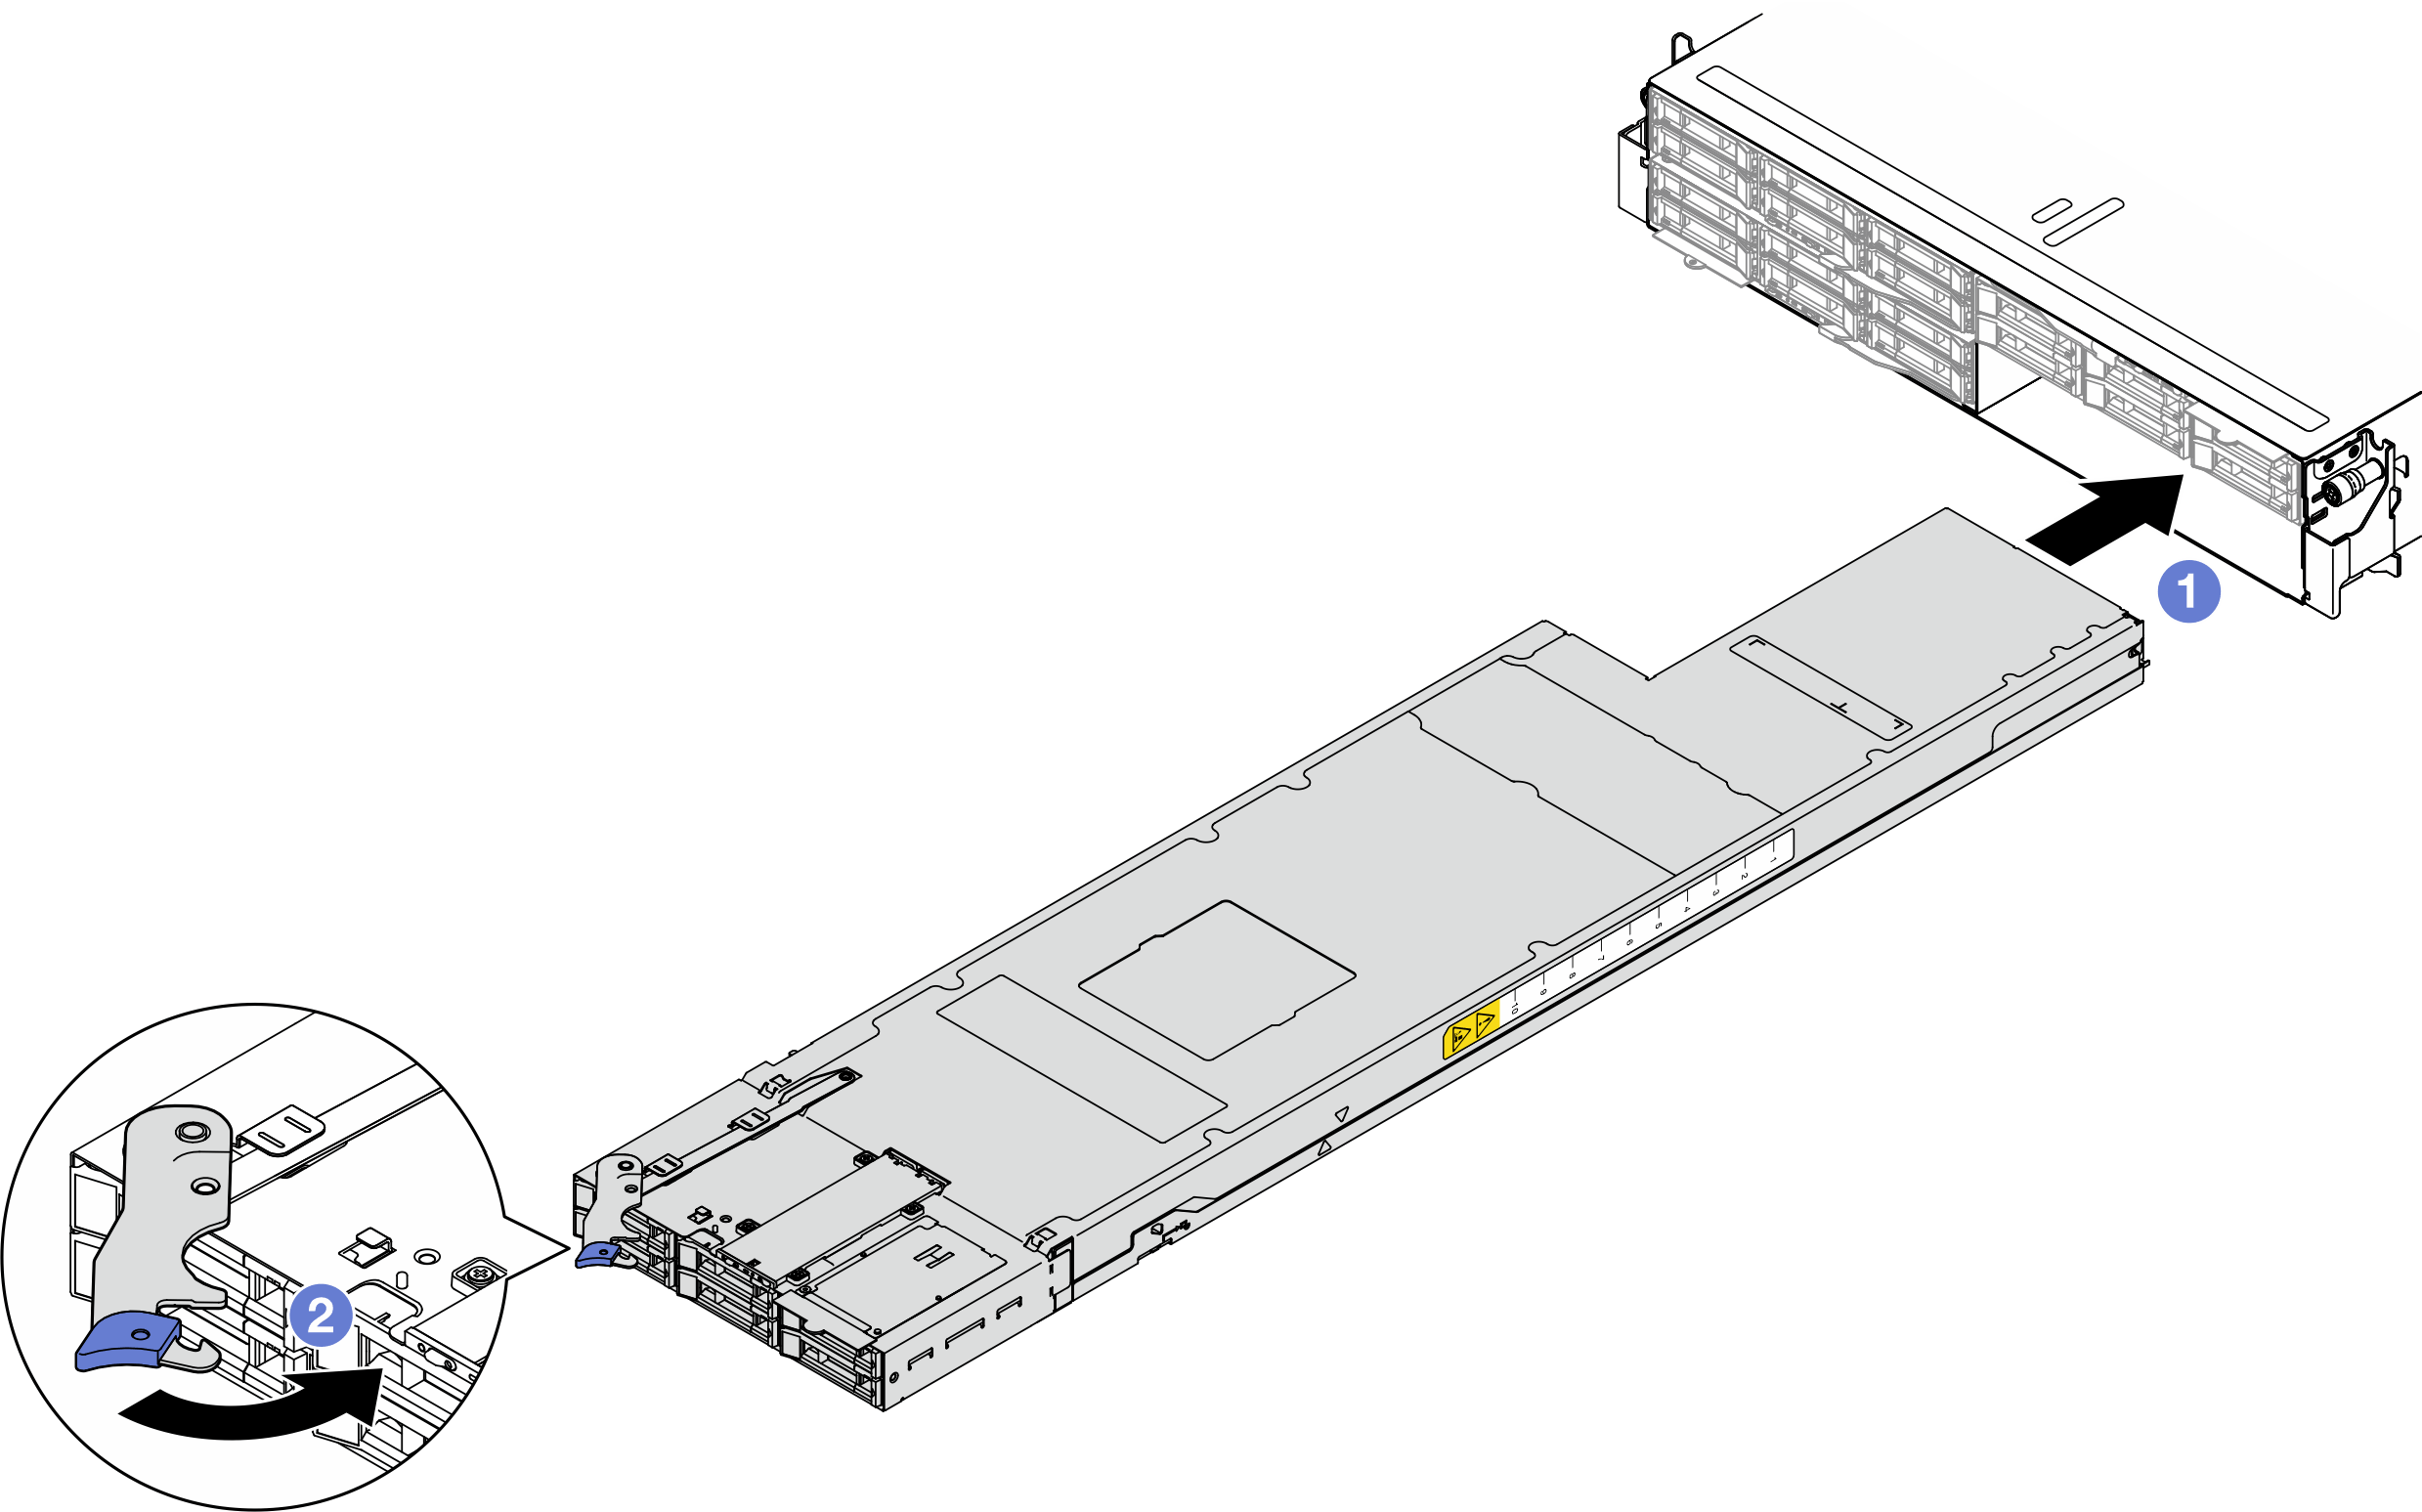 Node installation to a right tray